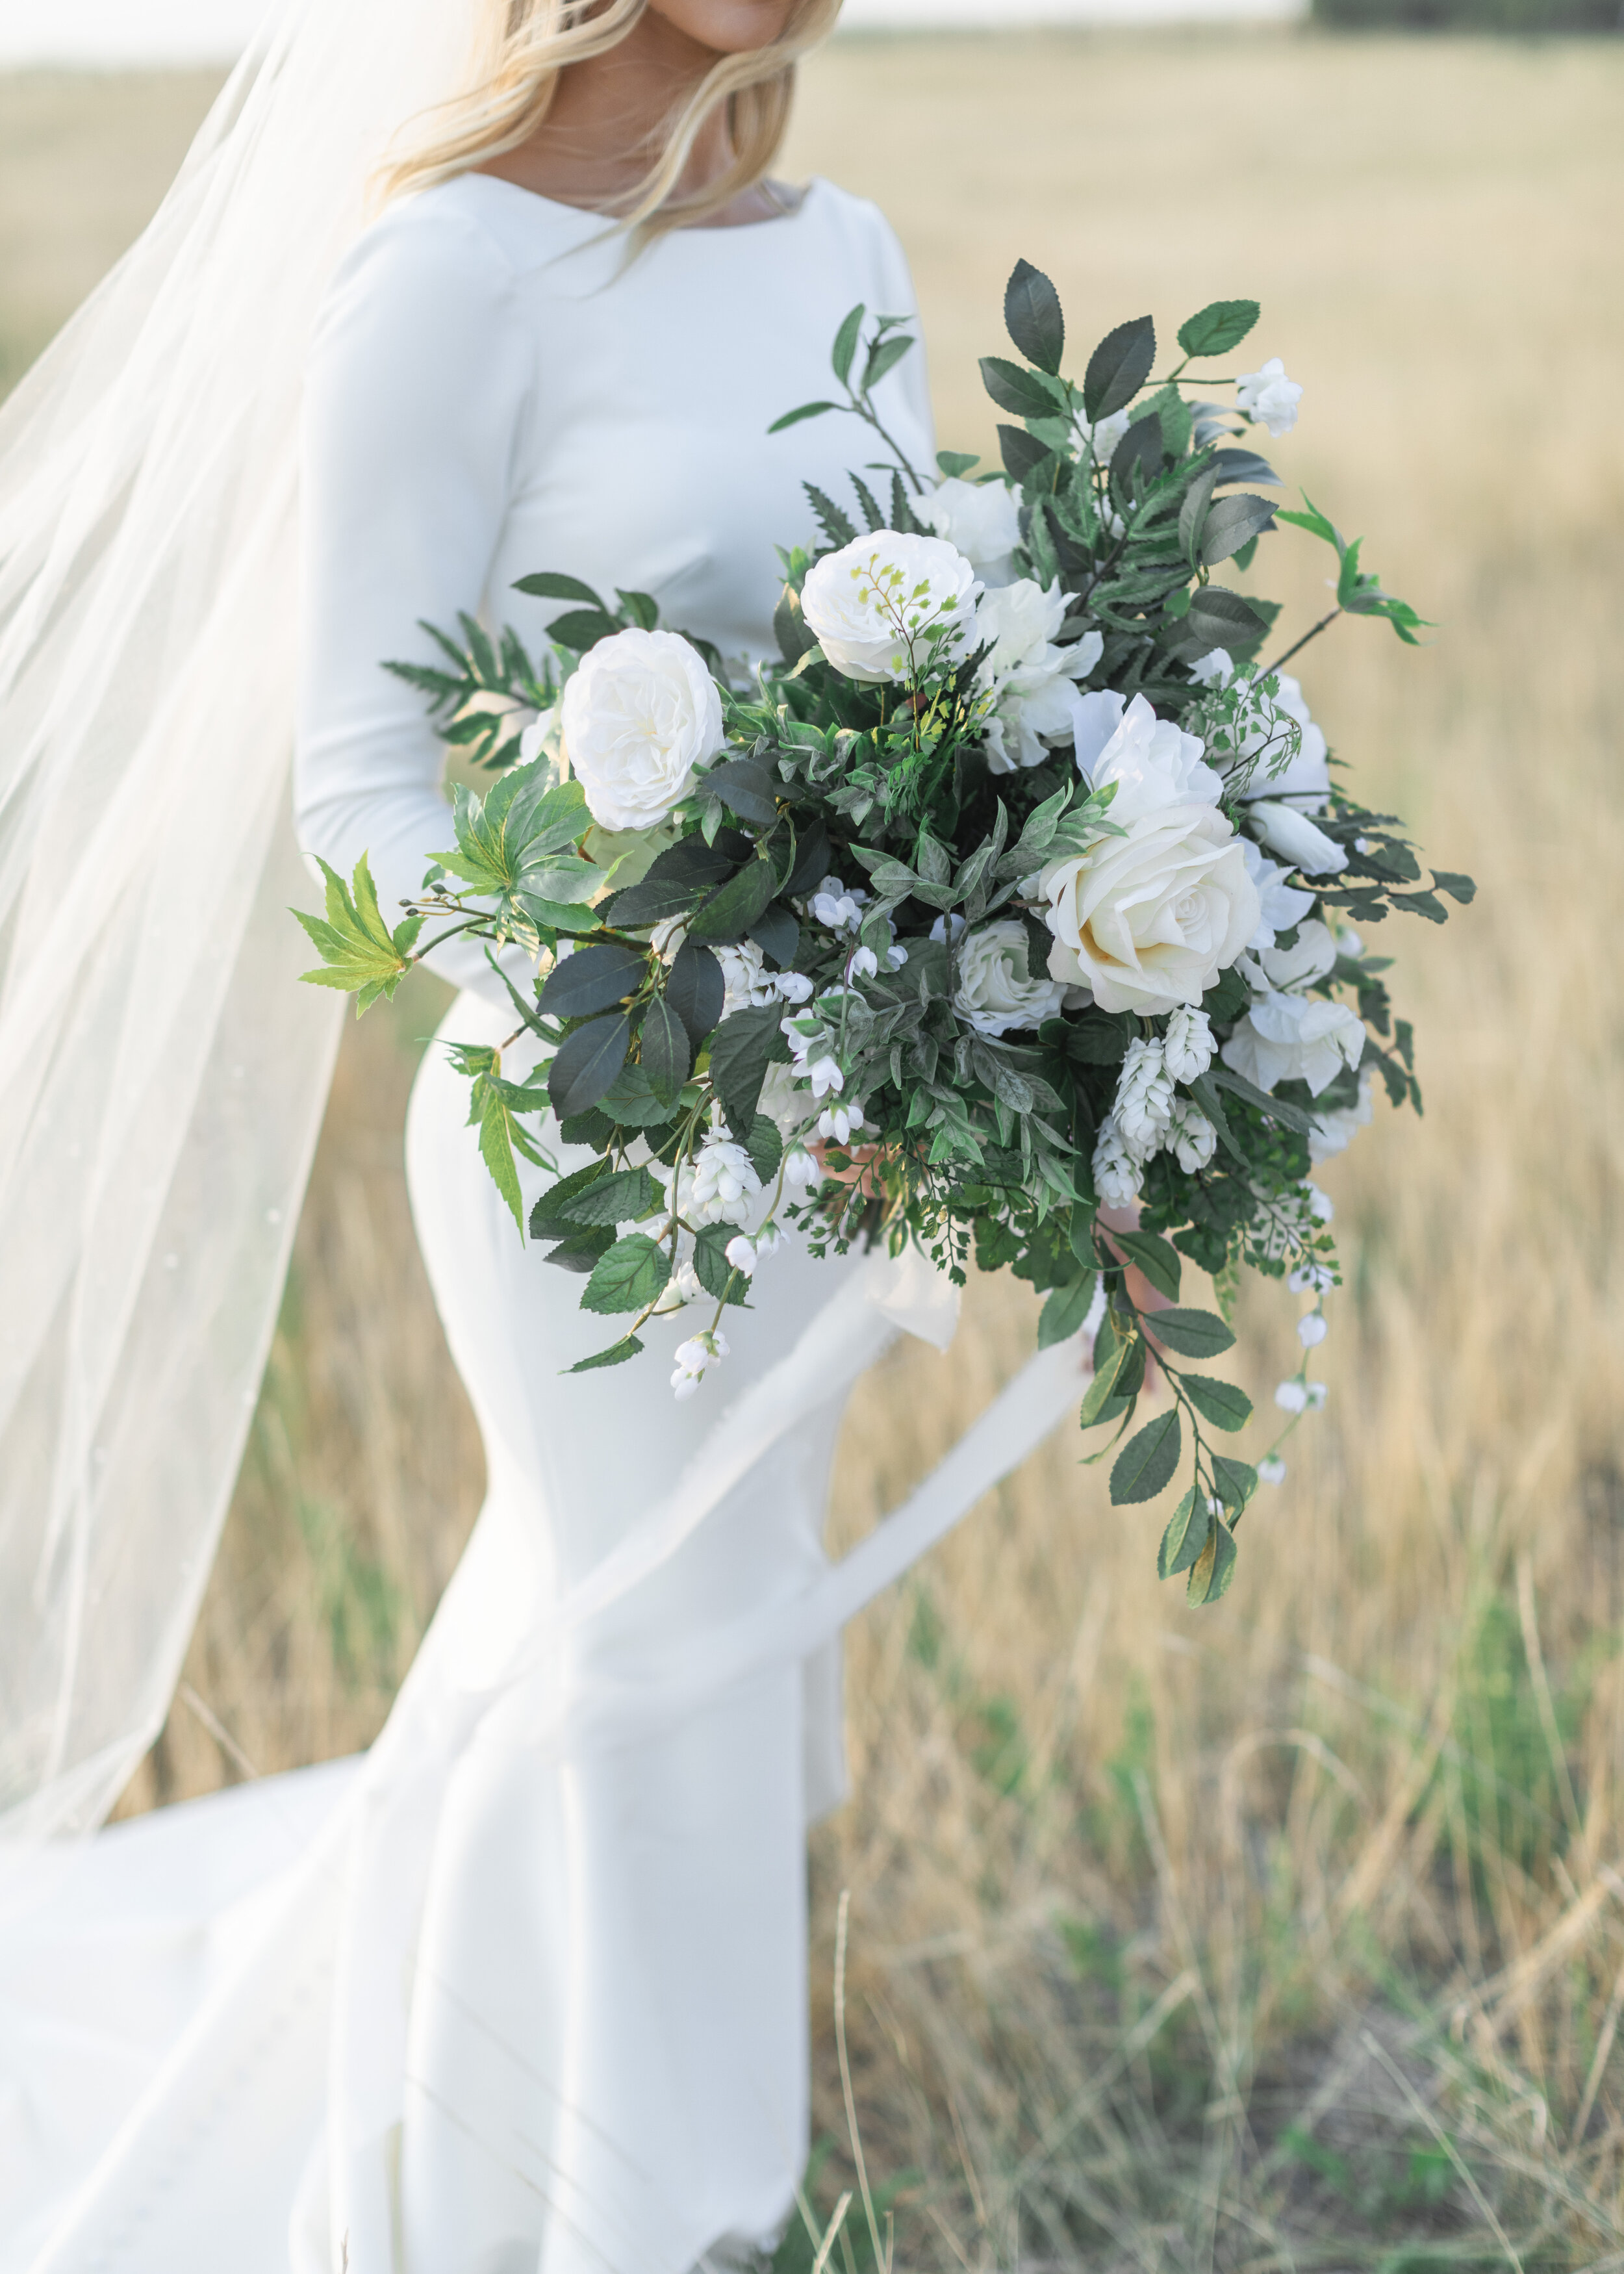  A beautiful bridal bouquet featuring large white flowers with lots of green foliage being held by the bride in a yellow grass field in Salt Lake City by Savana Richardson Photography. Bridal bouquet summer wedding bouquet white floral bouquet #savan